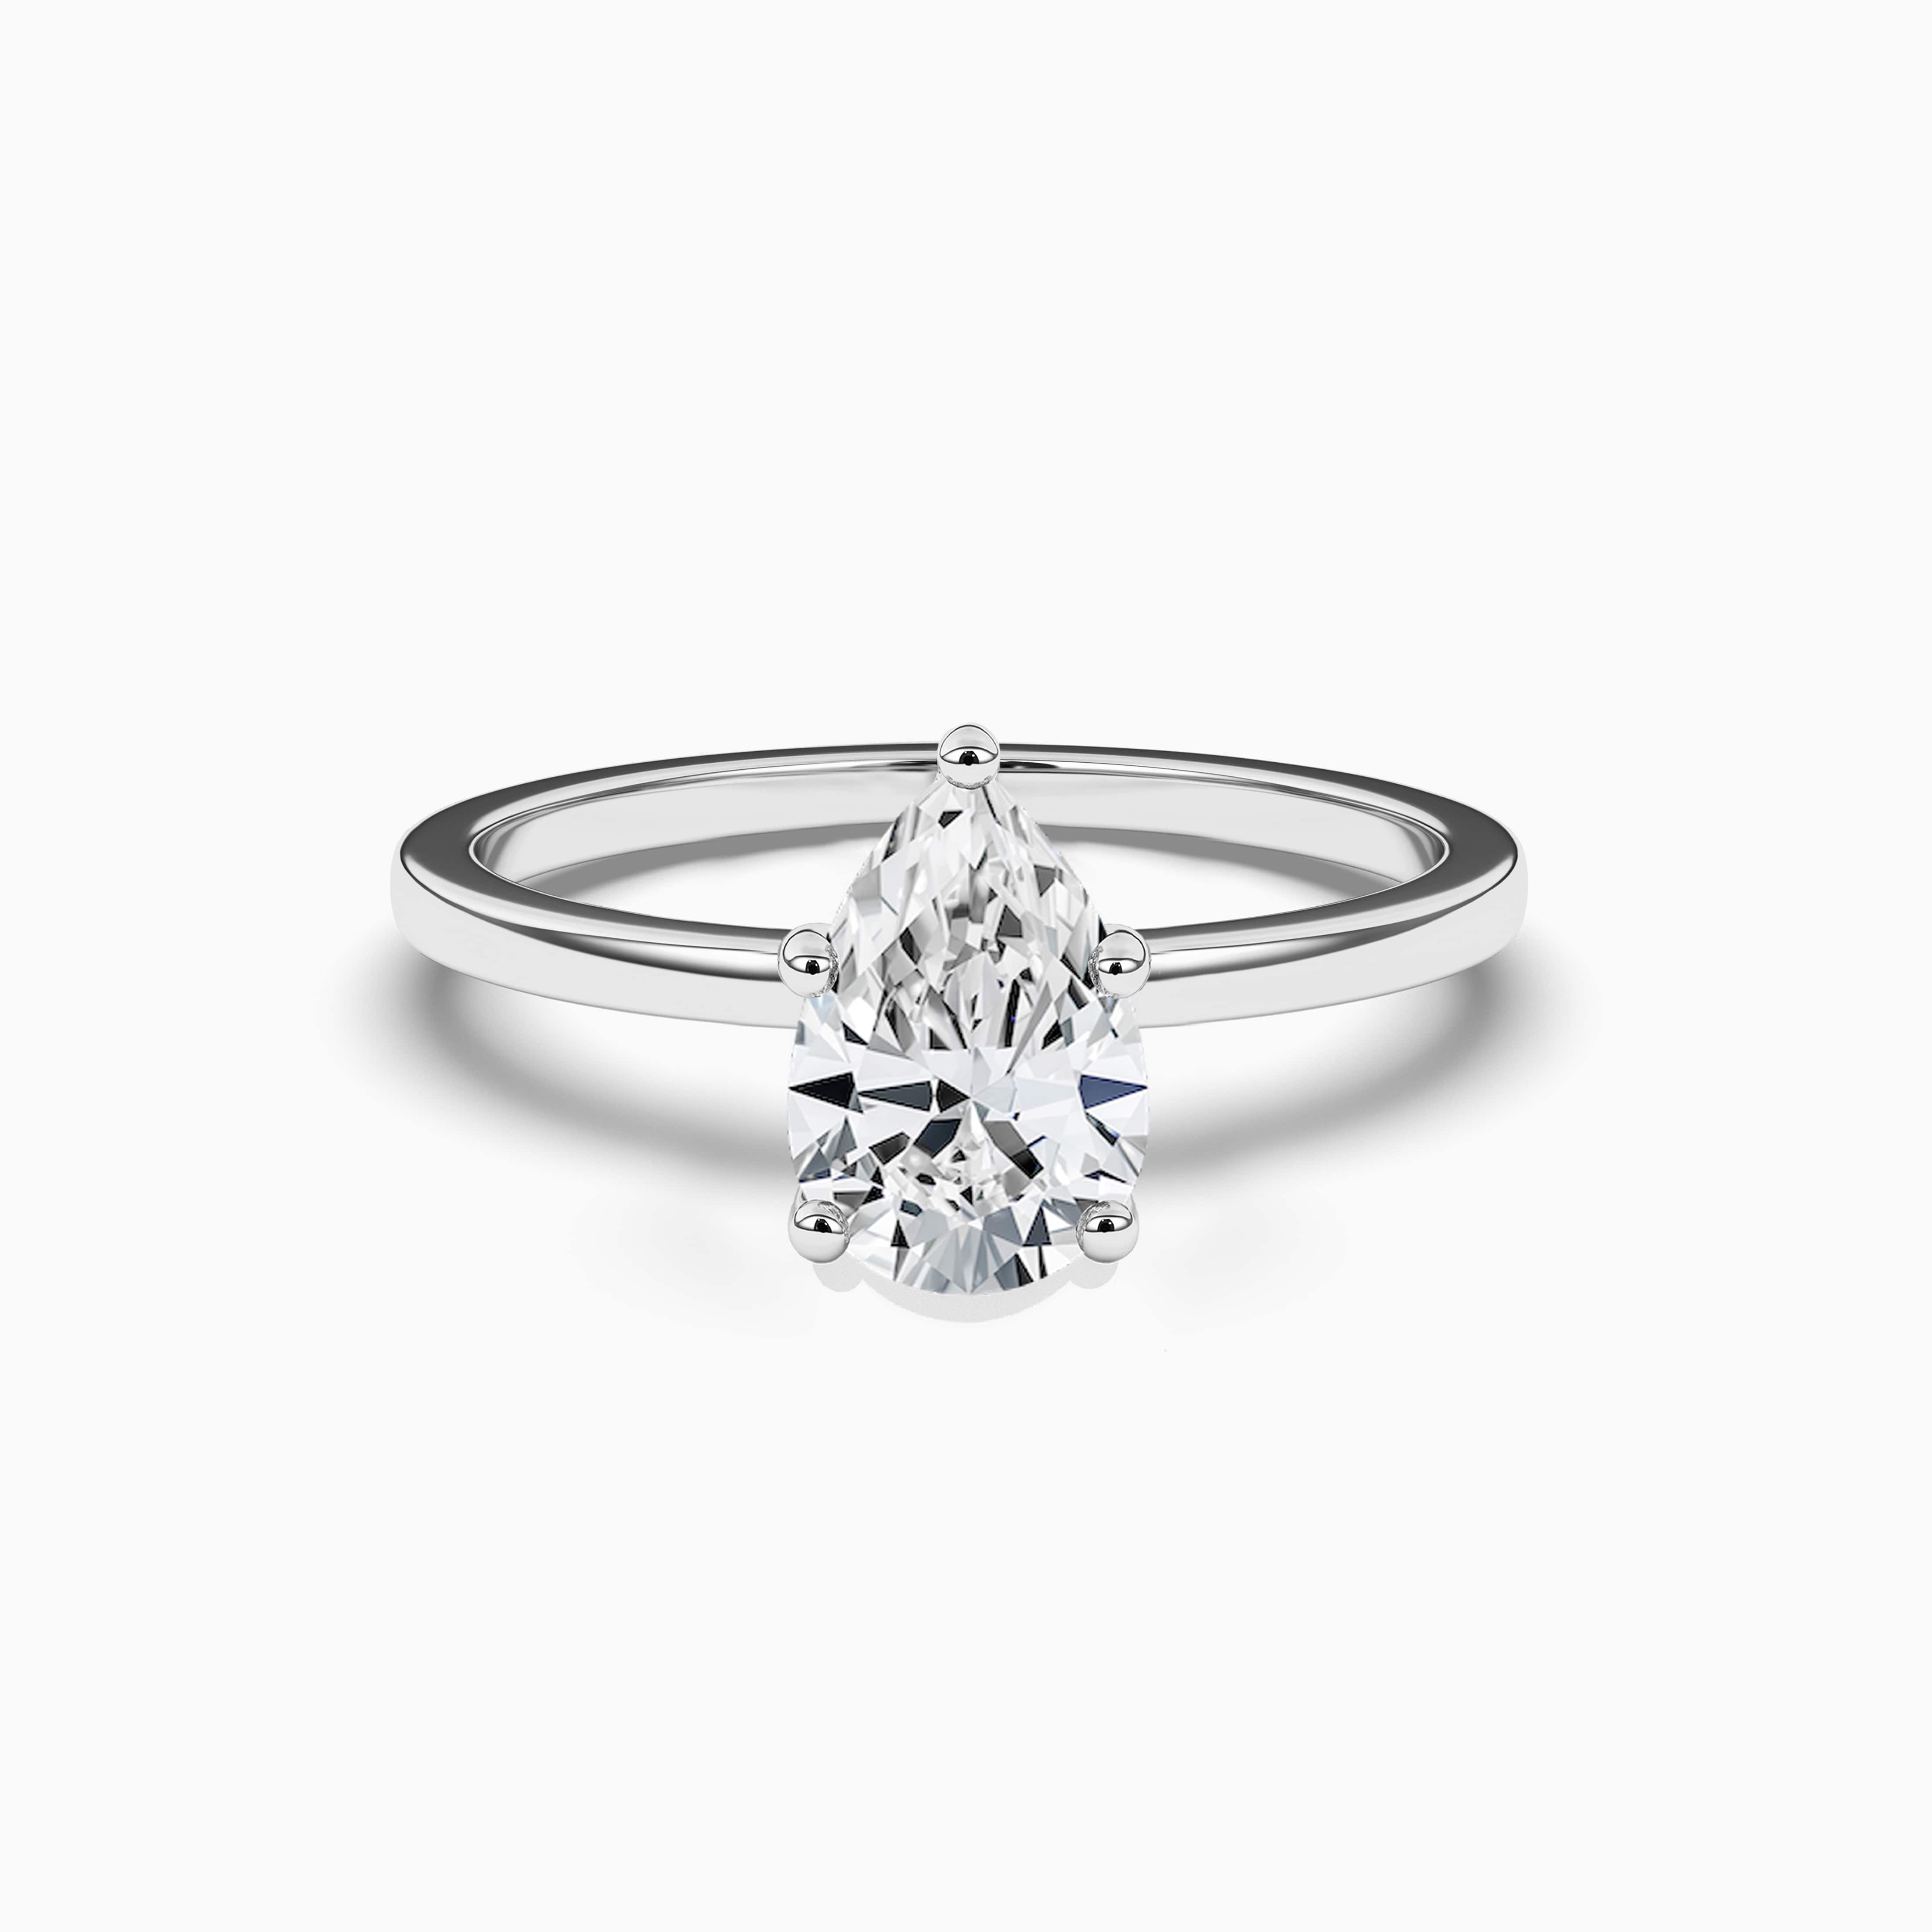 2.00ctw pear shaped engagement ring in white gold